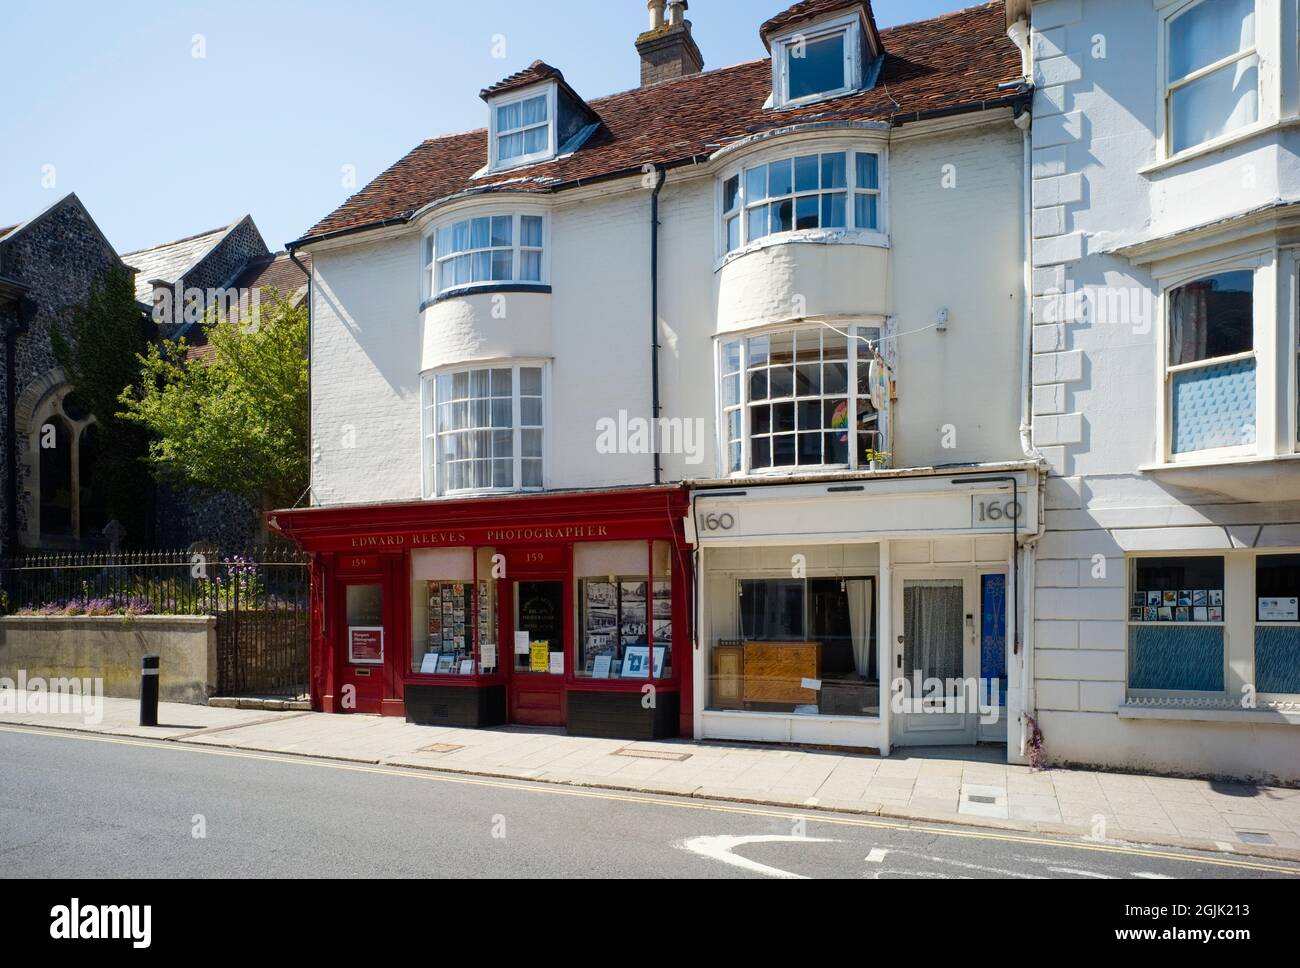 Photographers shop in the High Street, Lewes, East Sussex Stock Photo